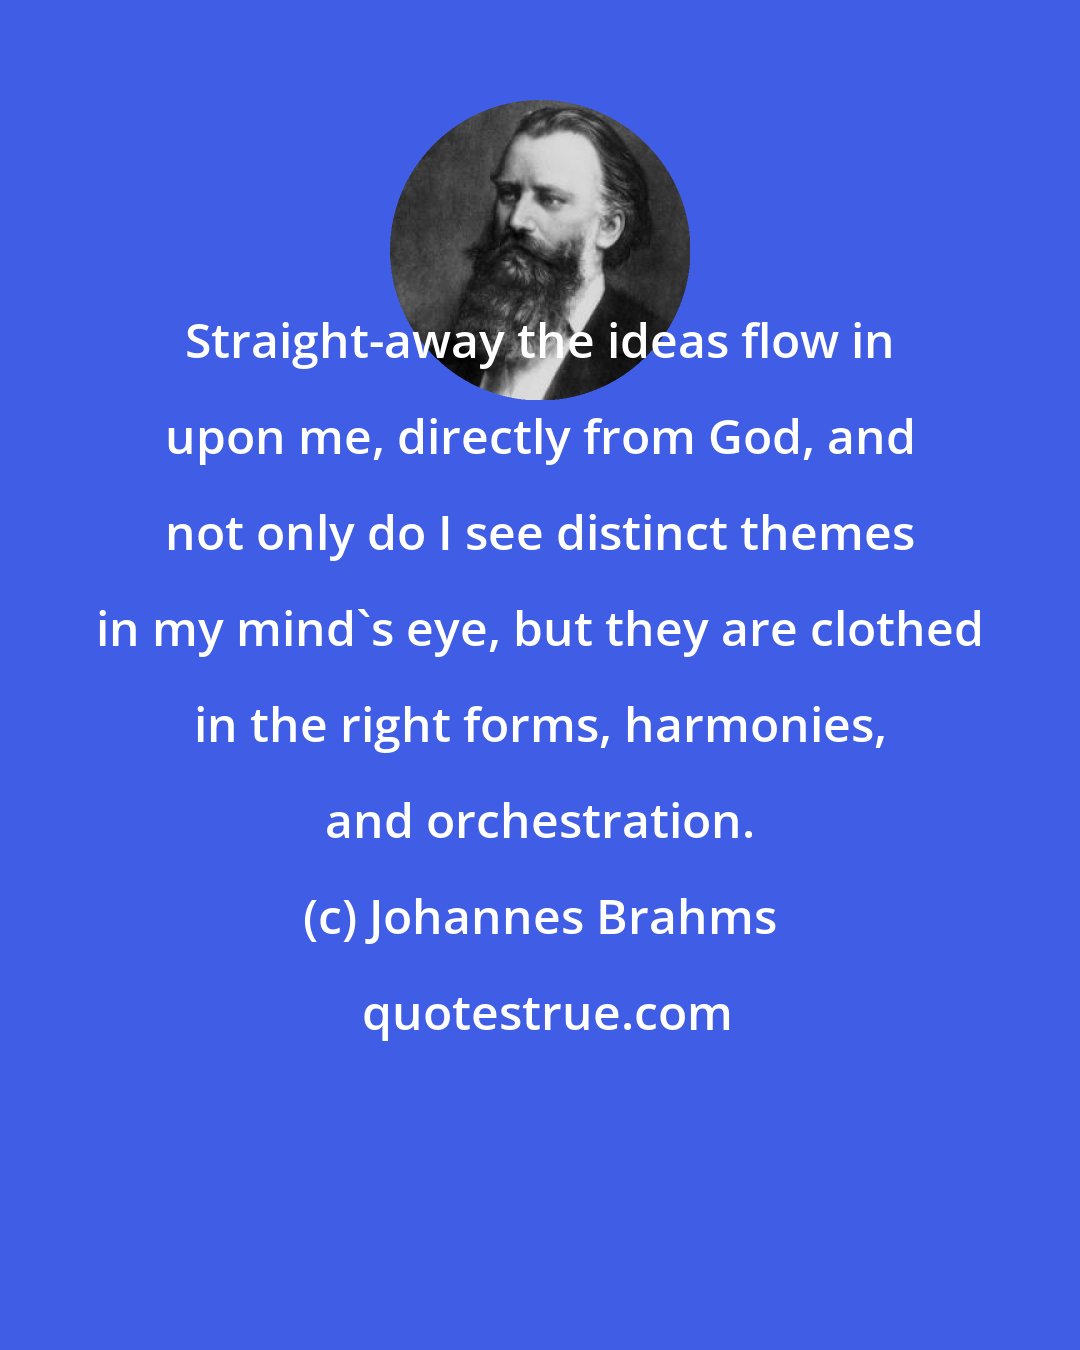 Johannes Brahms: Straight-away the ideas flow in upon me, directly from God, and not only do I see distinct themes in my mind's eye, but they are clothed in the right forms, harmonies, and orchestration.